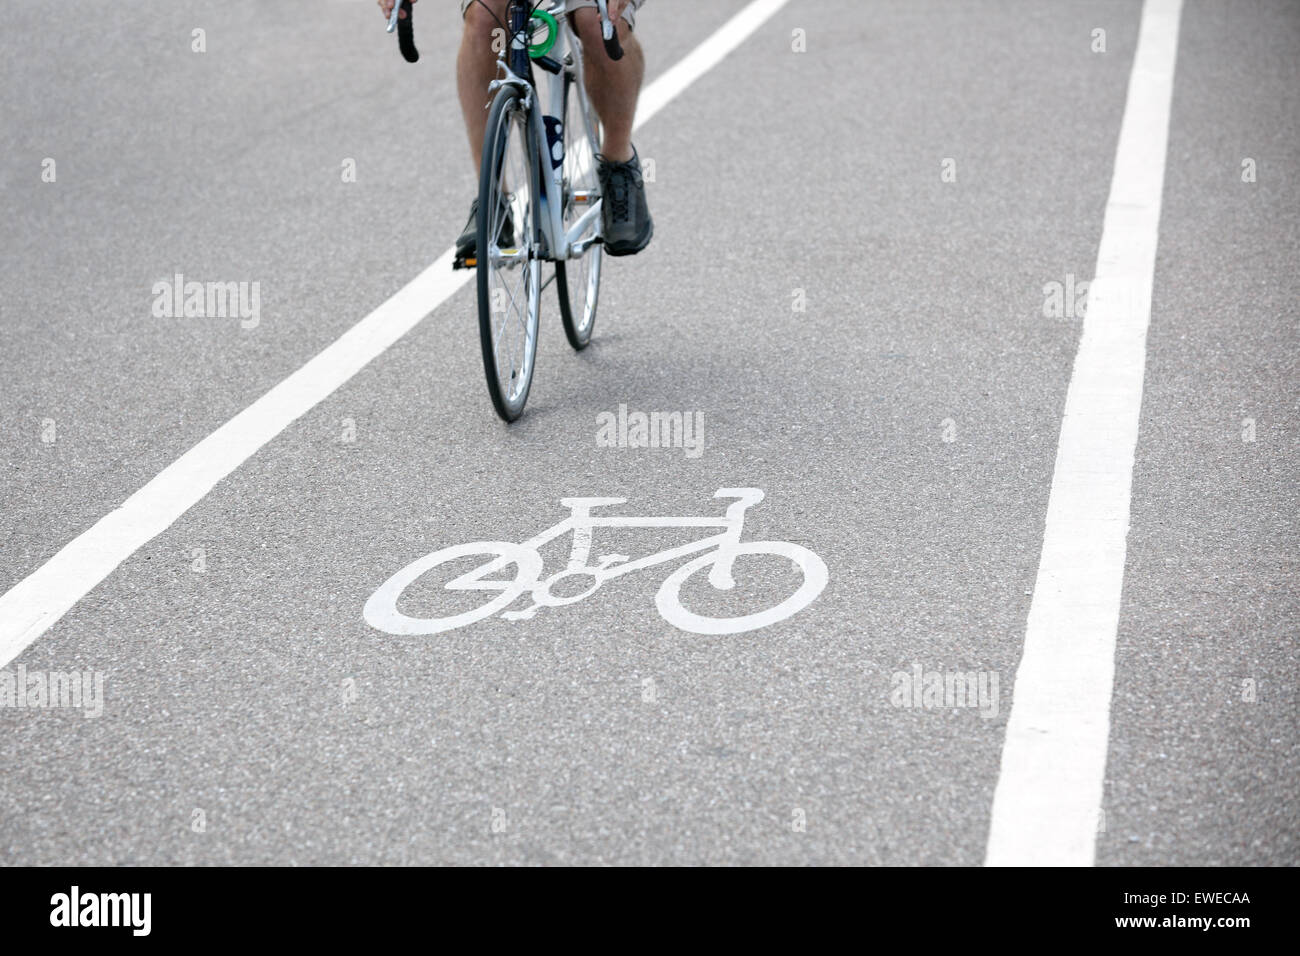 Commuter riding a bicycle on a city cycle lane or path across white painted bike symbol Stock Photo